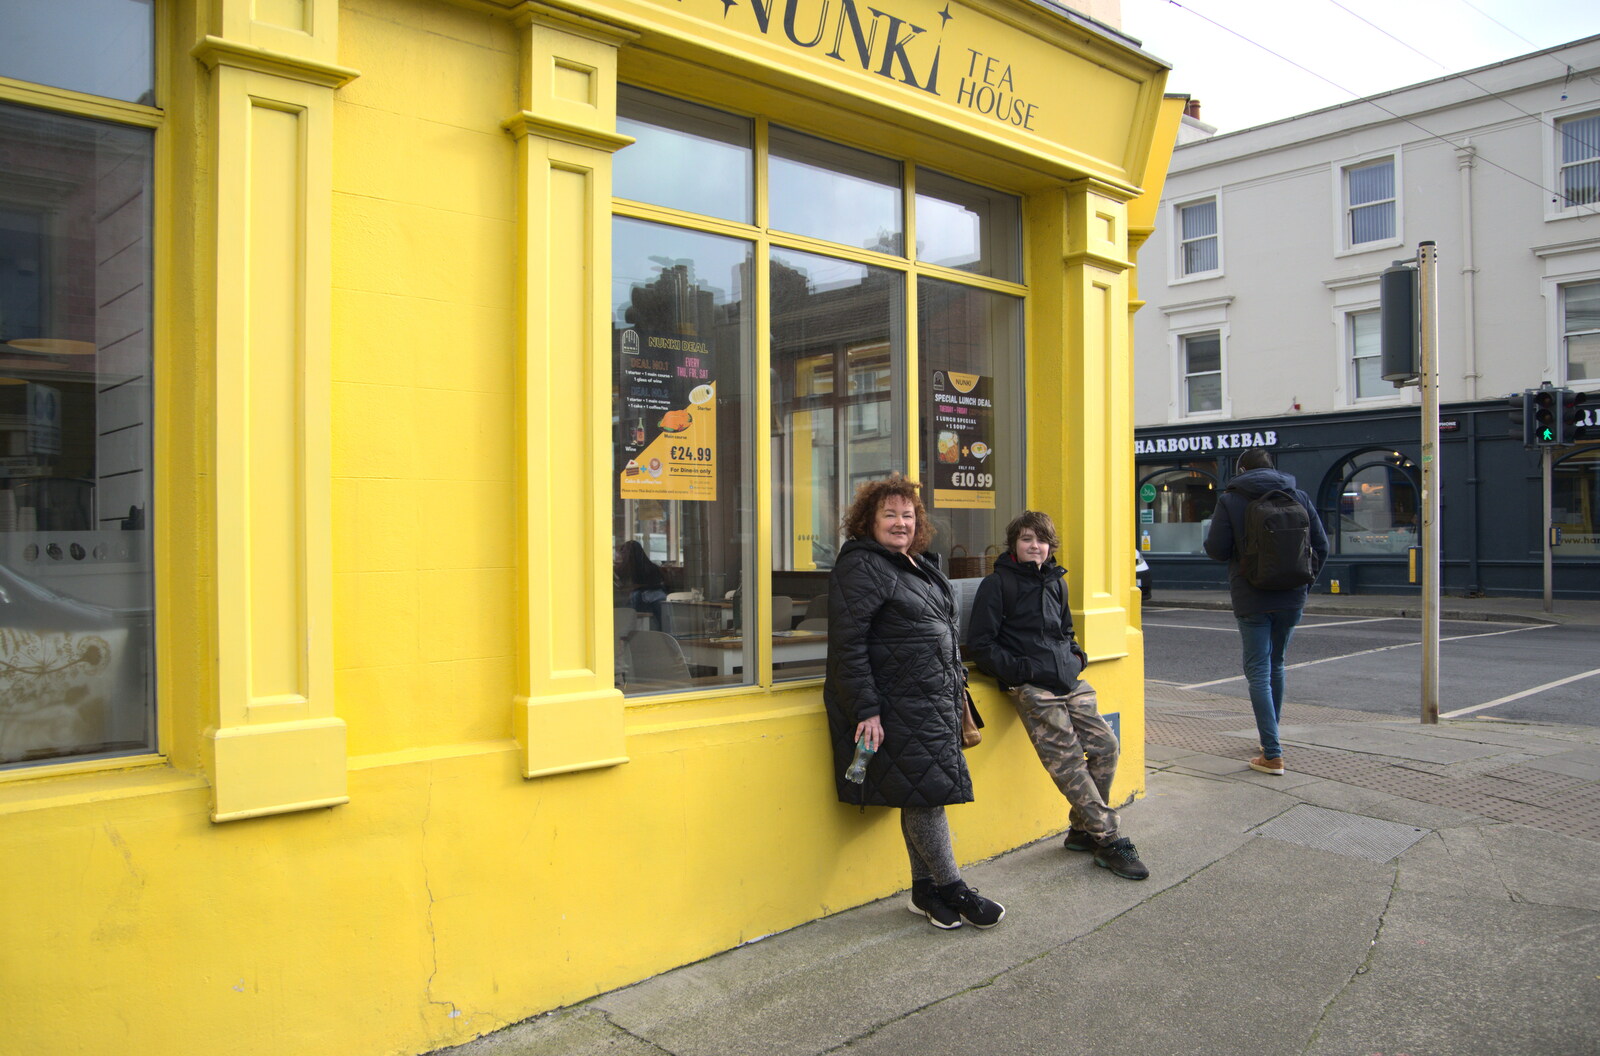 The End of the Breffni, Blackrock, Dublin - 18th February 2023: Louise and Fred hang around outside Nunki